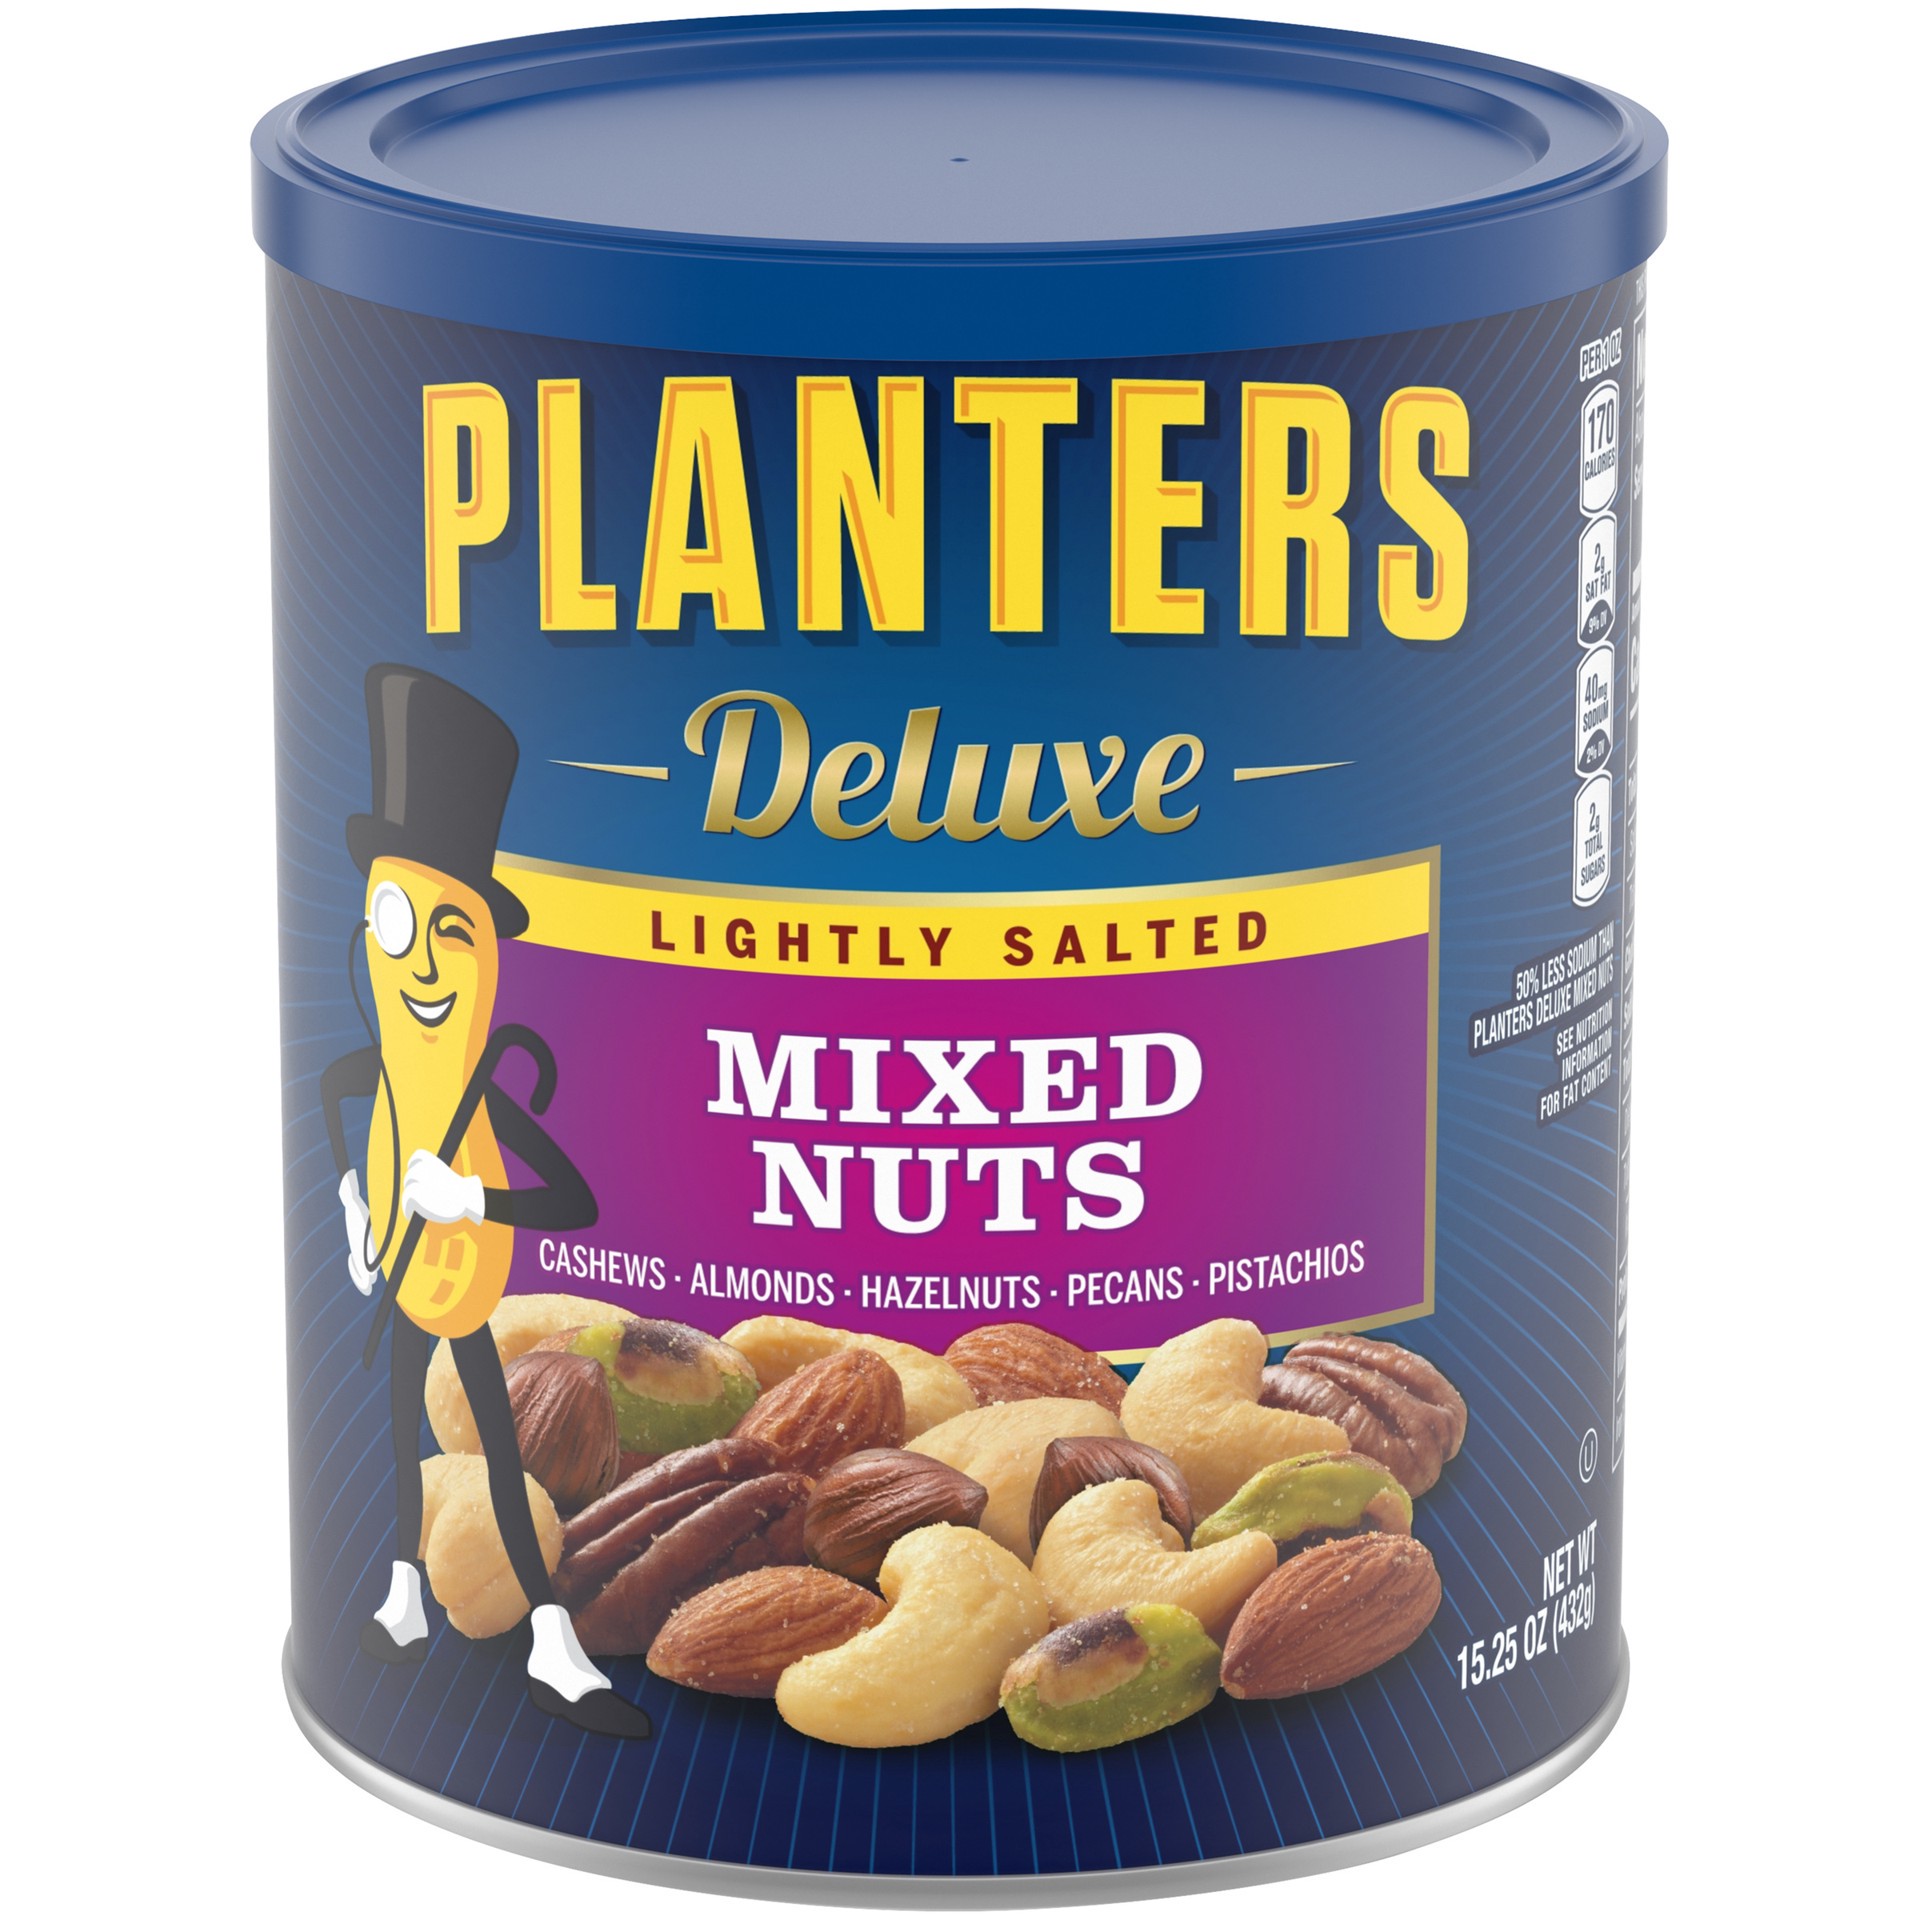 slide 1 of 46, Planters Deluxe Lightly Salted Mixed Nuts 15.25 oz, 15.25 oz